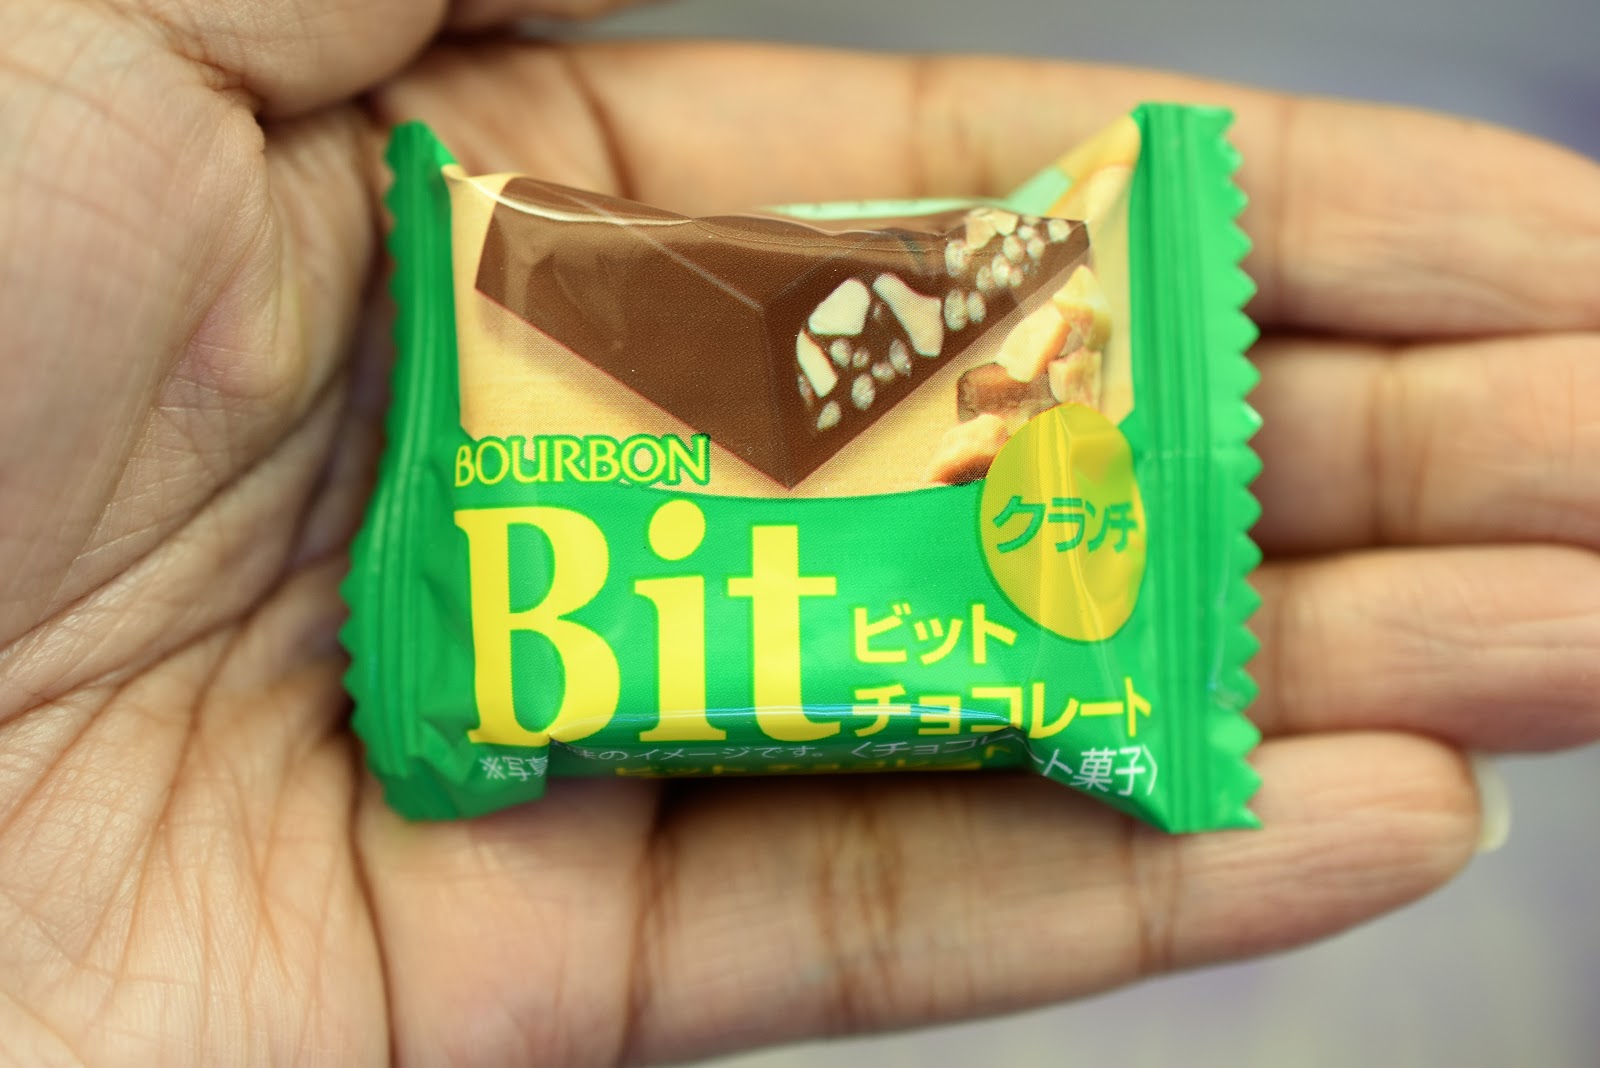 oh decodan i have yet to trie this japanese candy